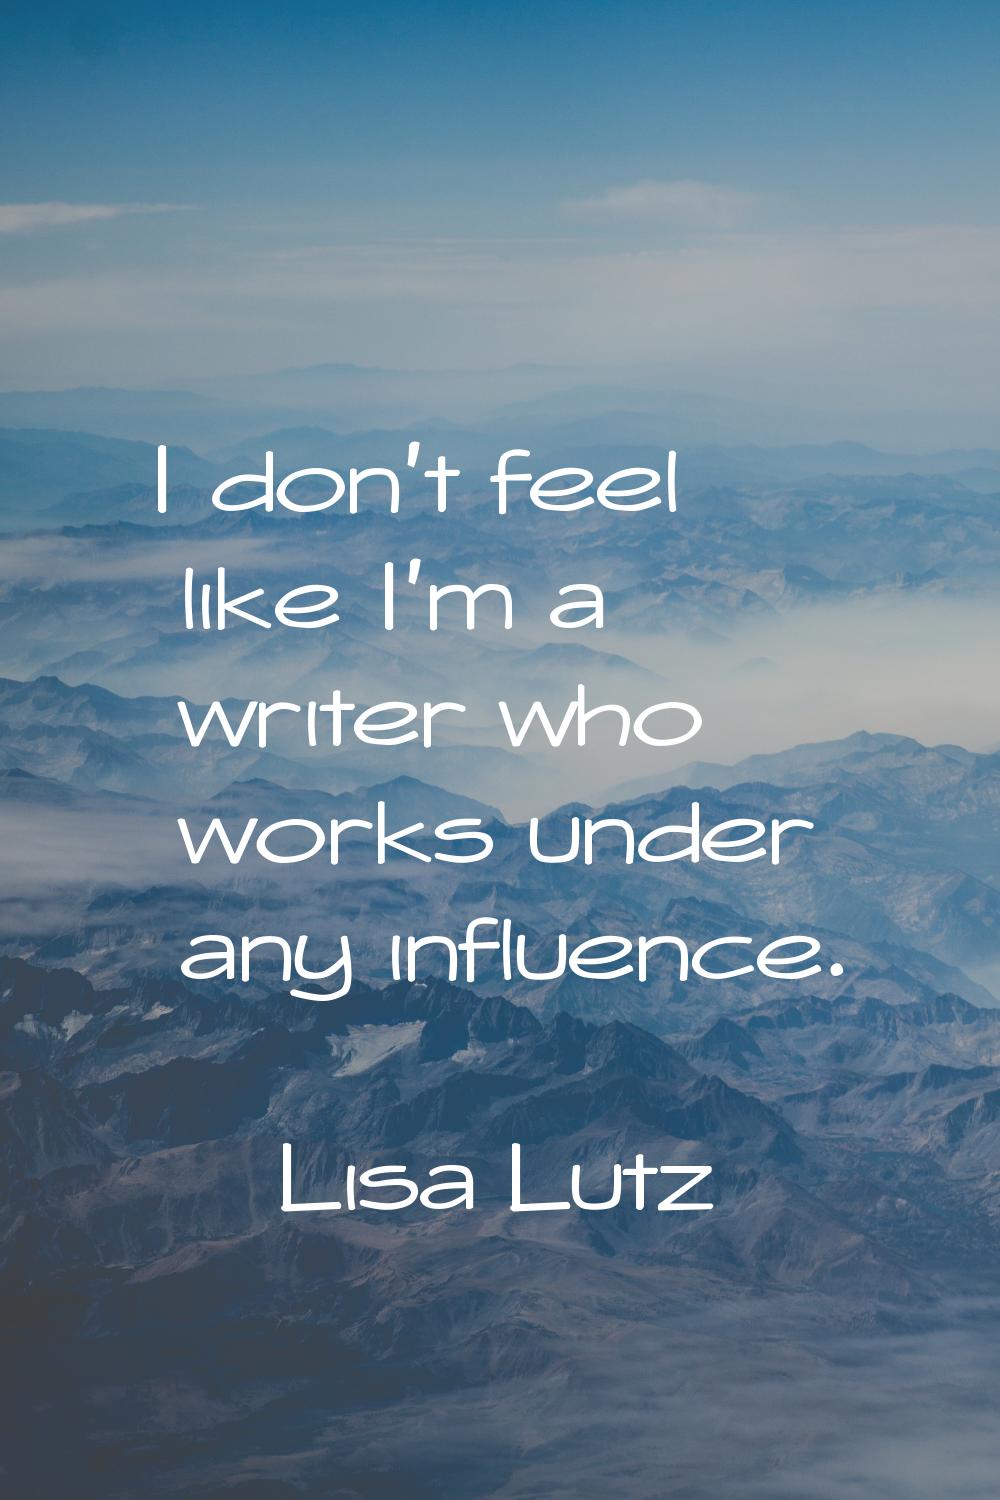 I don't feel like I'm a writer who works under any influence.